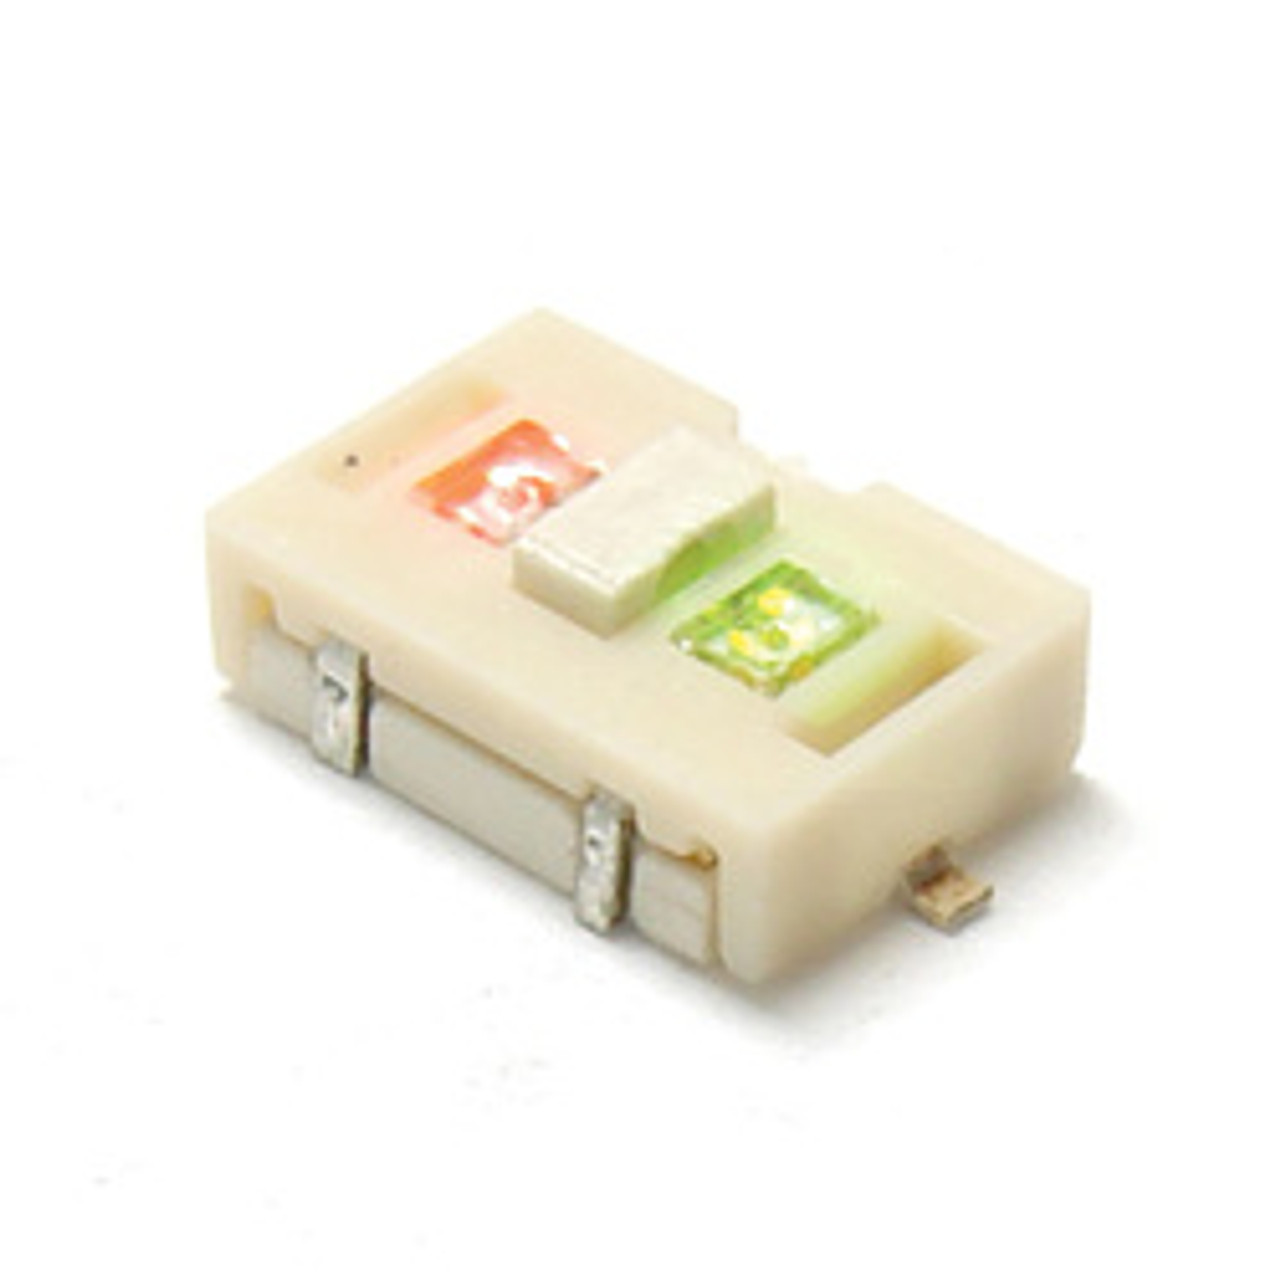 E-Switch TL-3200-A-F160-N-Y-R Tactile Switches